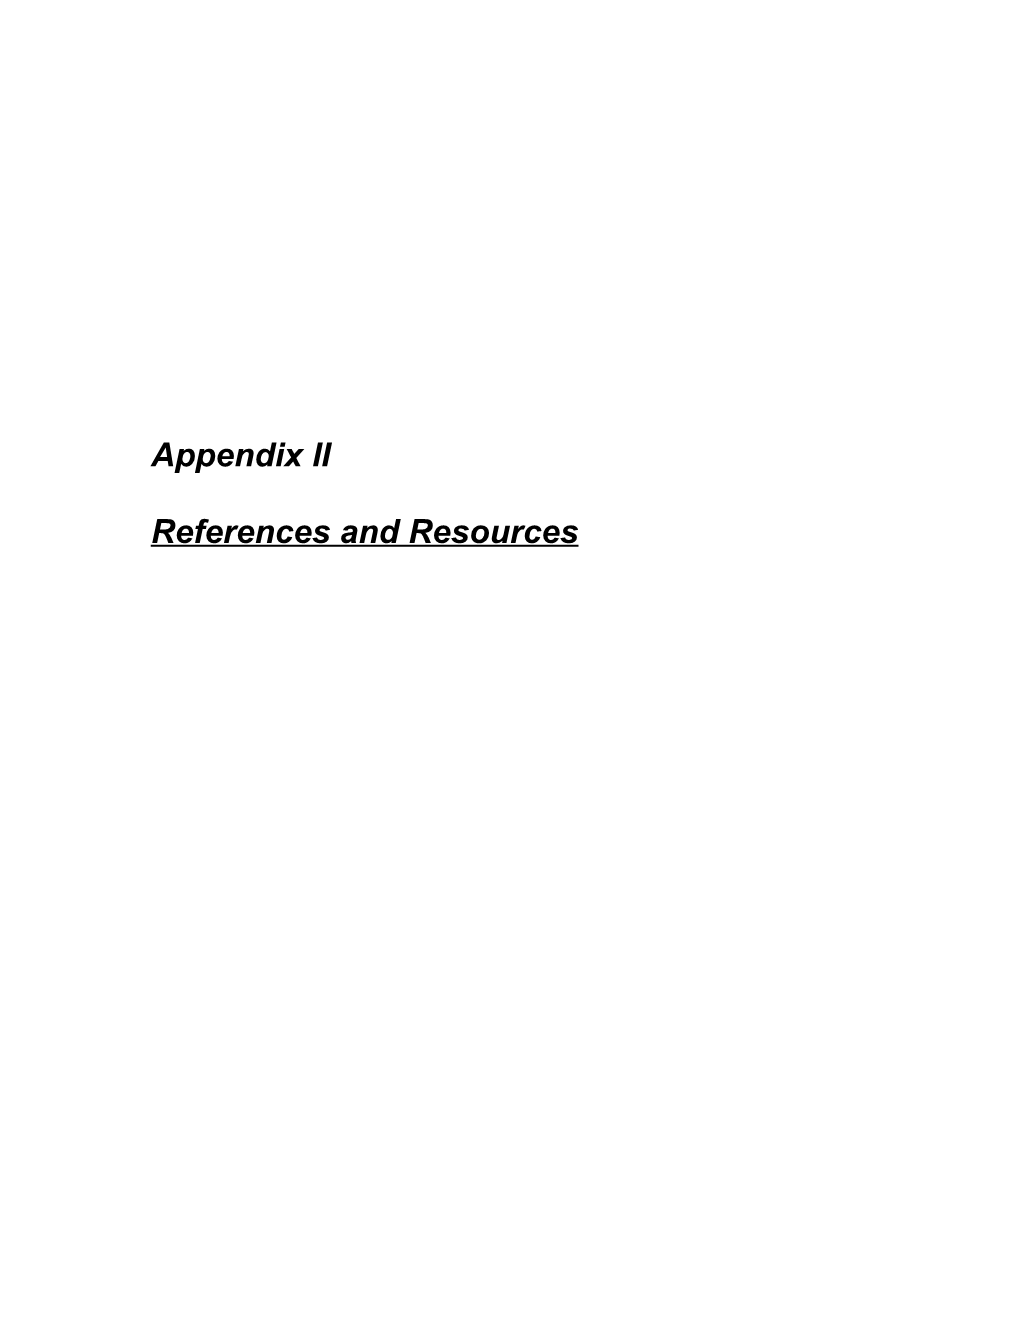 References and Resources References